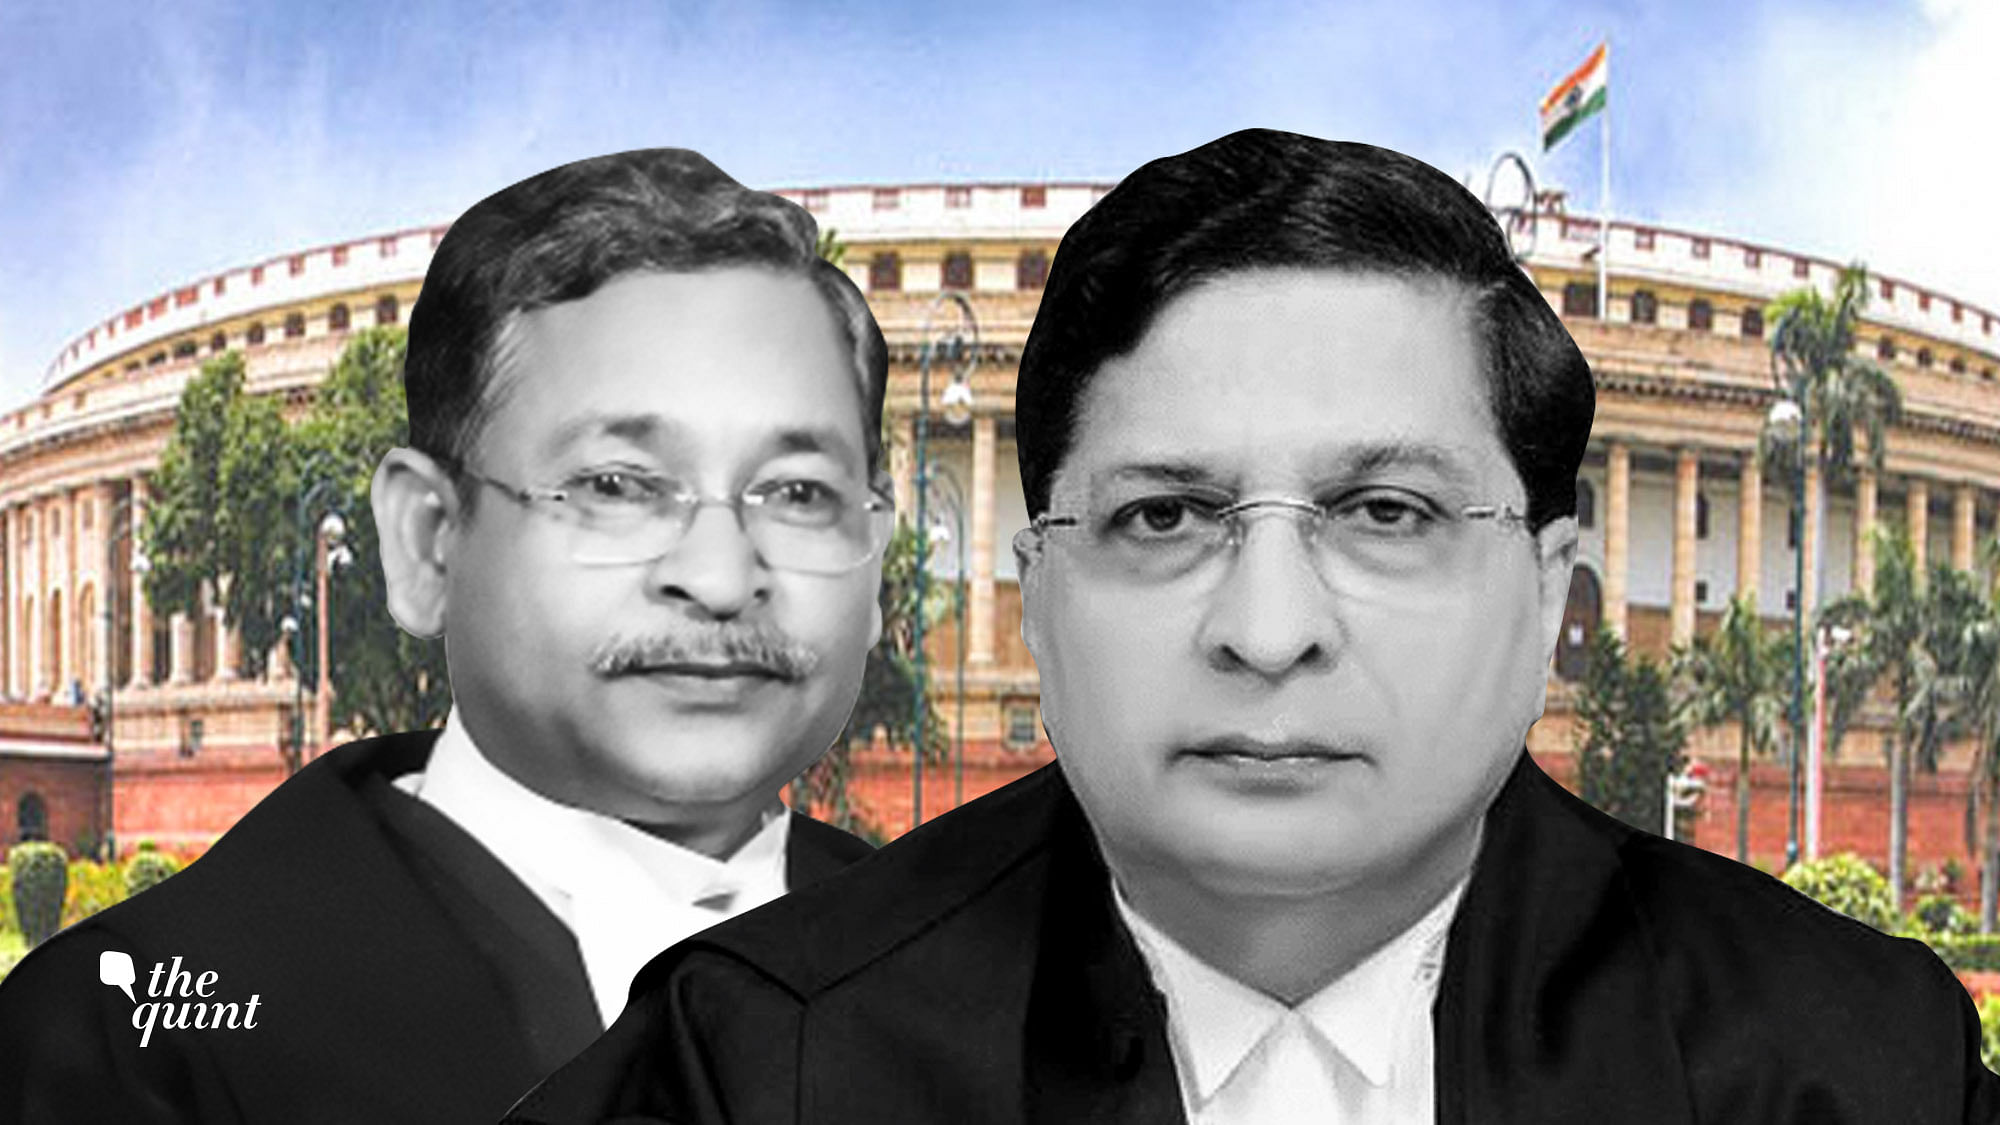 Chief Justice of India Dipak Misra (right) has recommended the removal of Allahabad High Court Justice Narayan Shukla (left), but impeachment by Parliament is the only effective option.